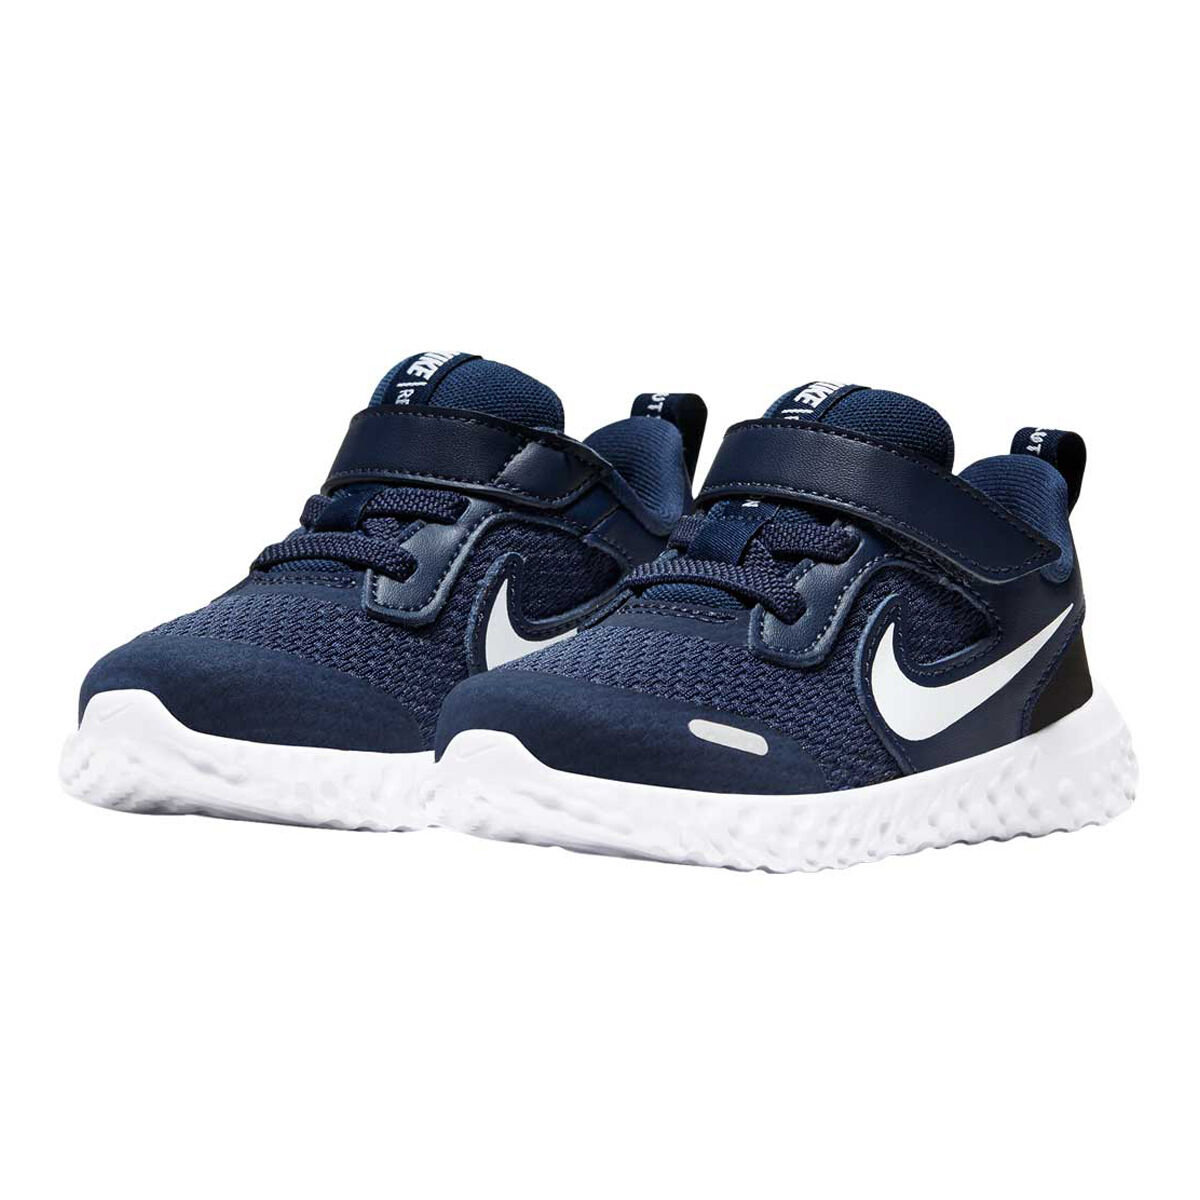 nike shoes 5 rupees